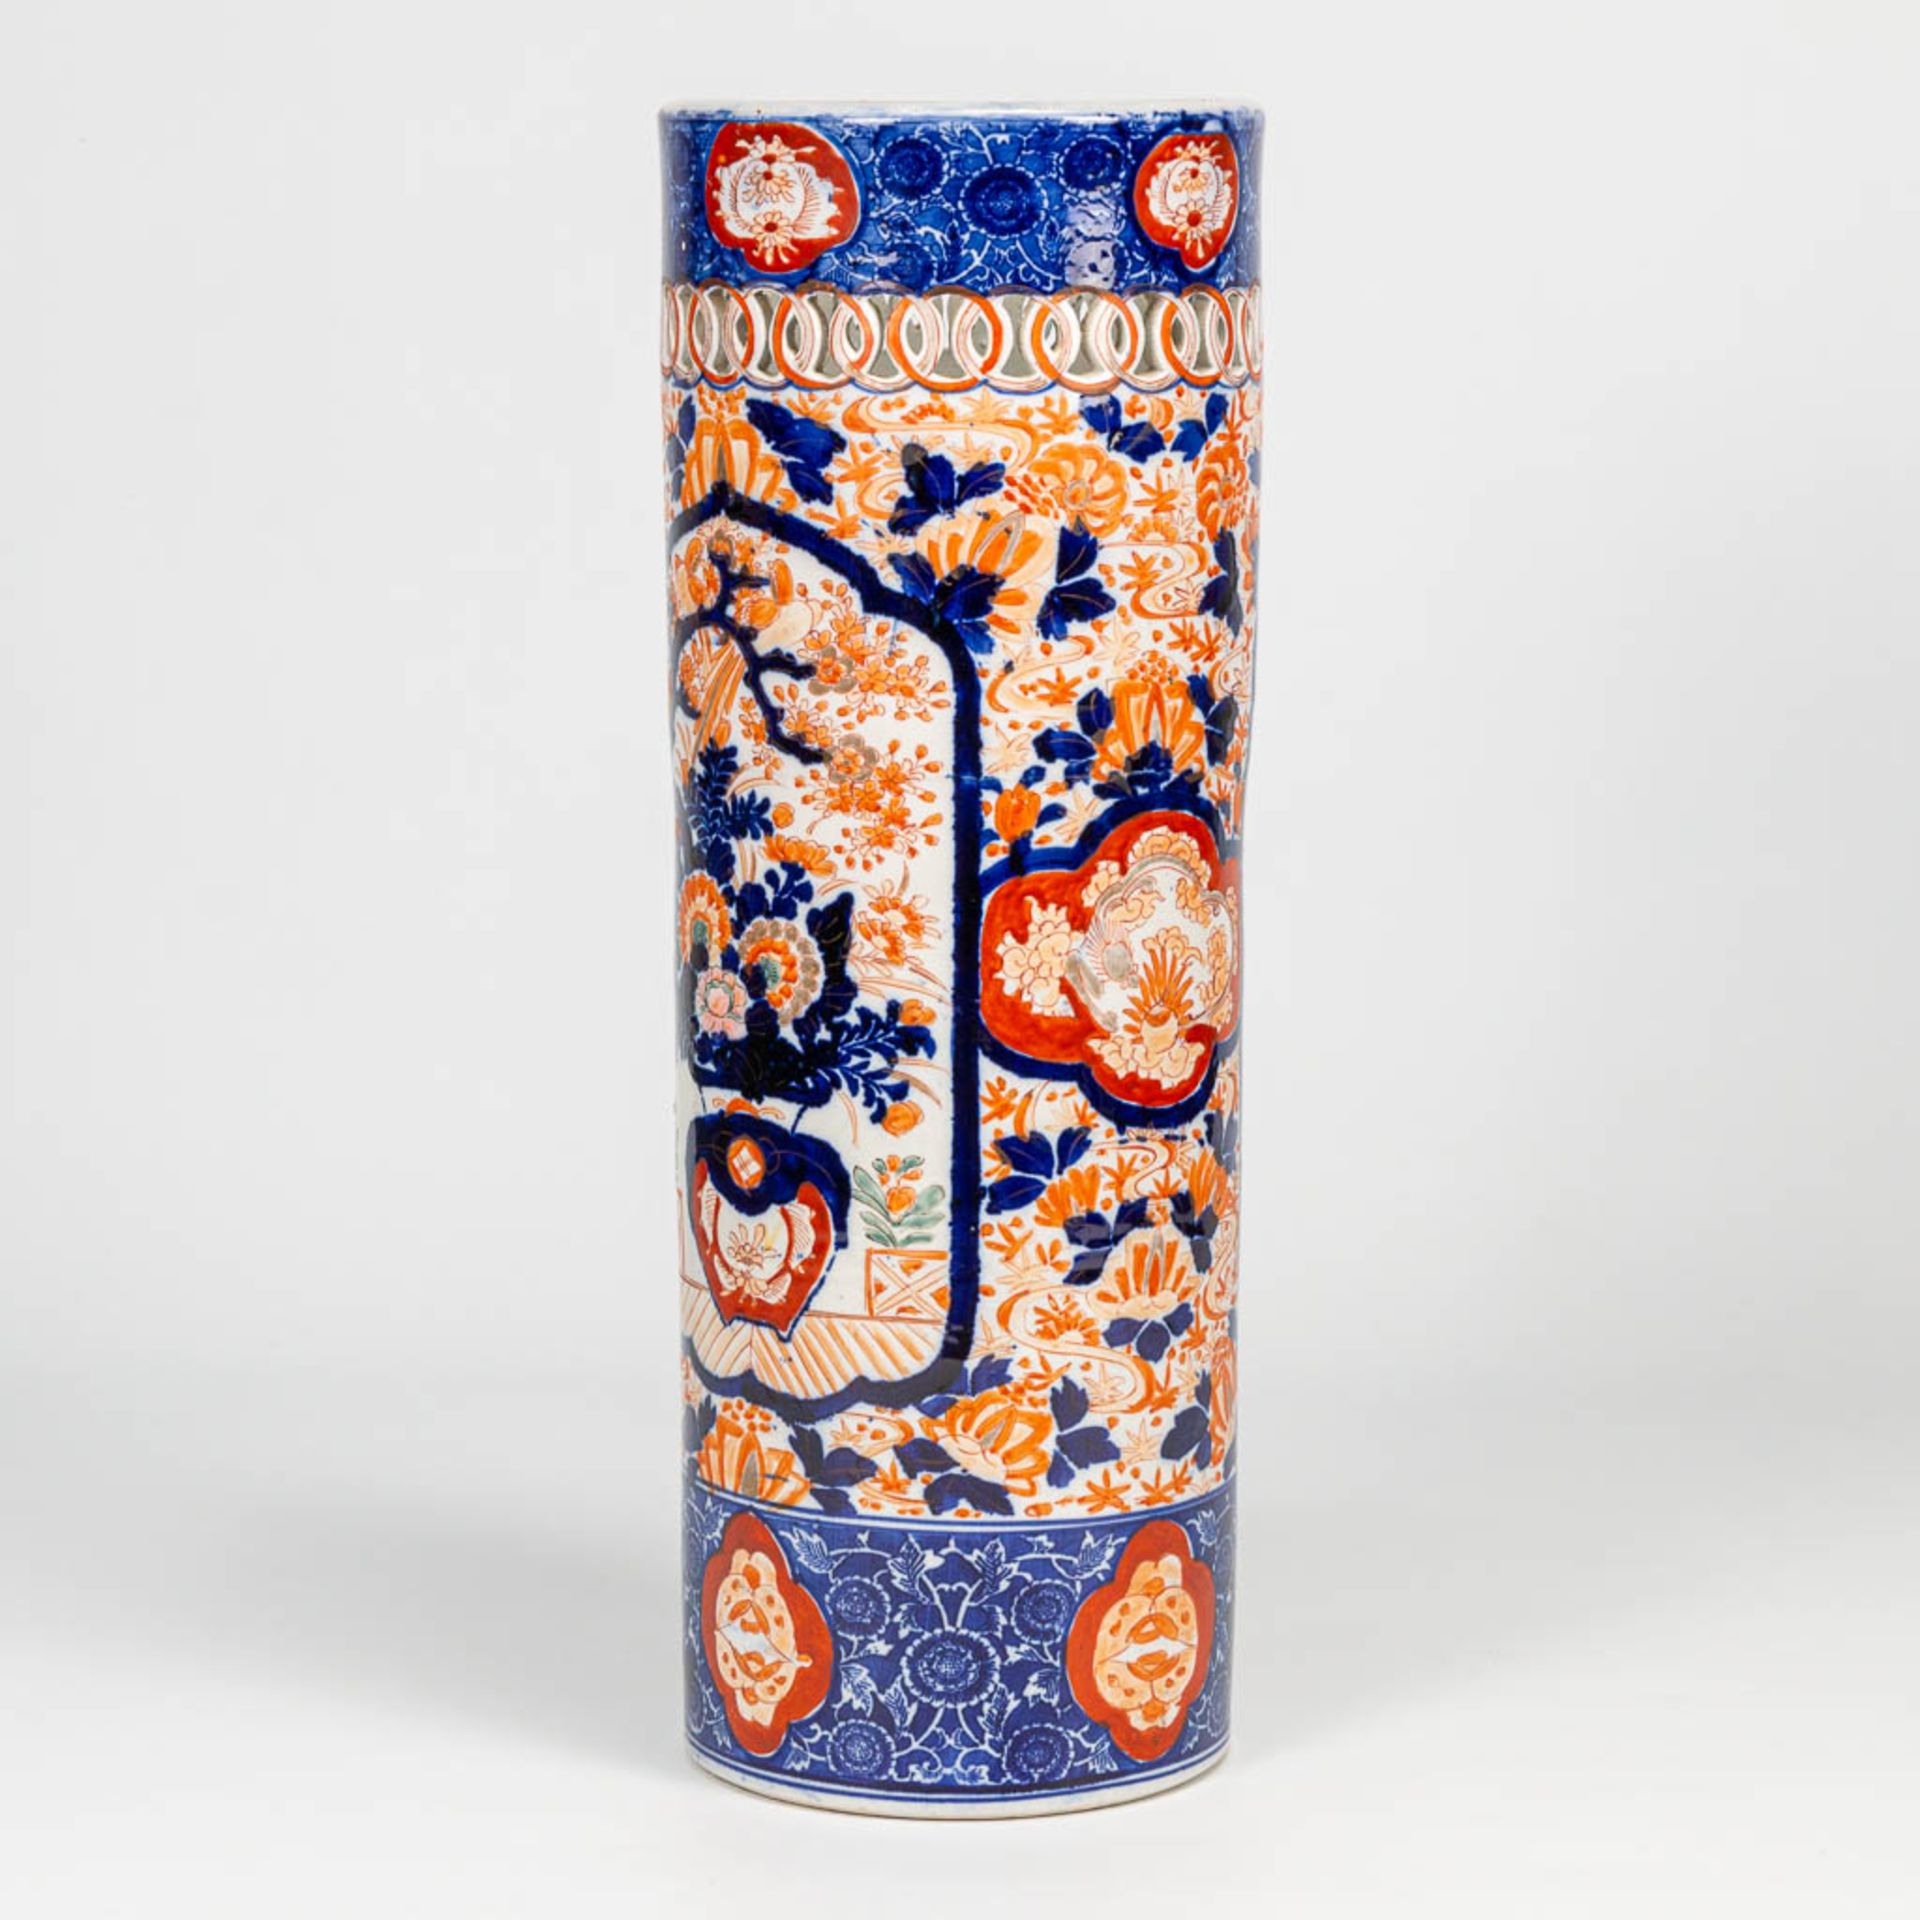 An Imari umbrella stand, vase made of porcelain in Japan. 19th/20th century. (61 x 22 cm) - Image 9 of 17